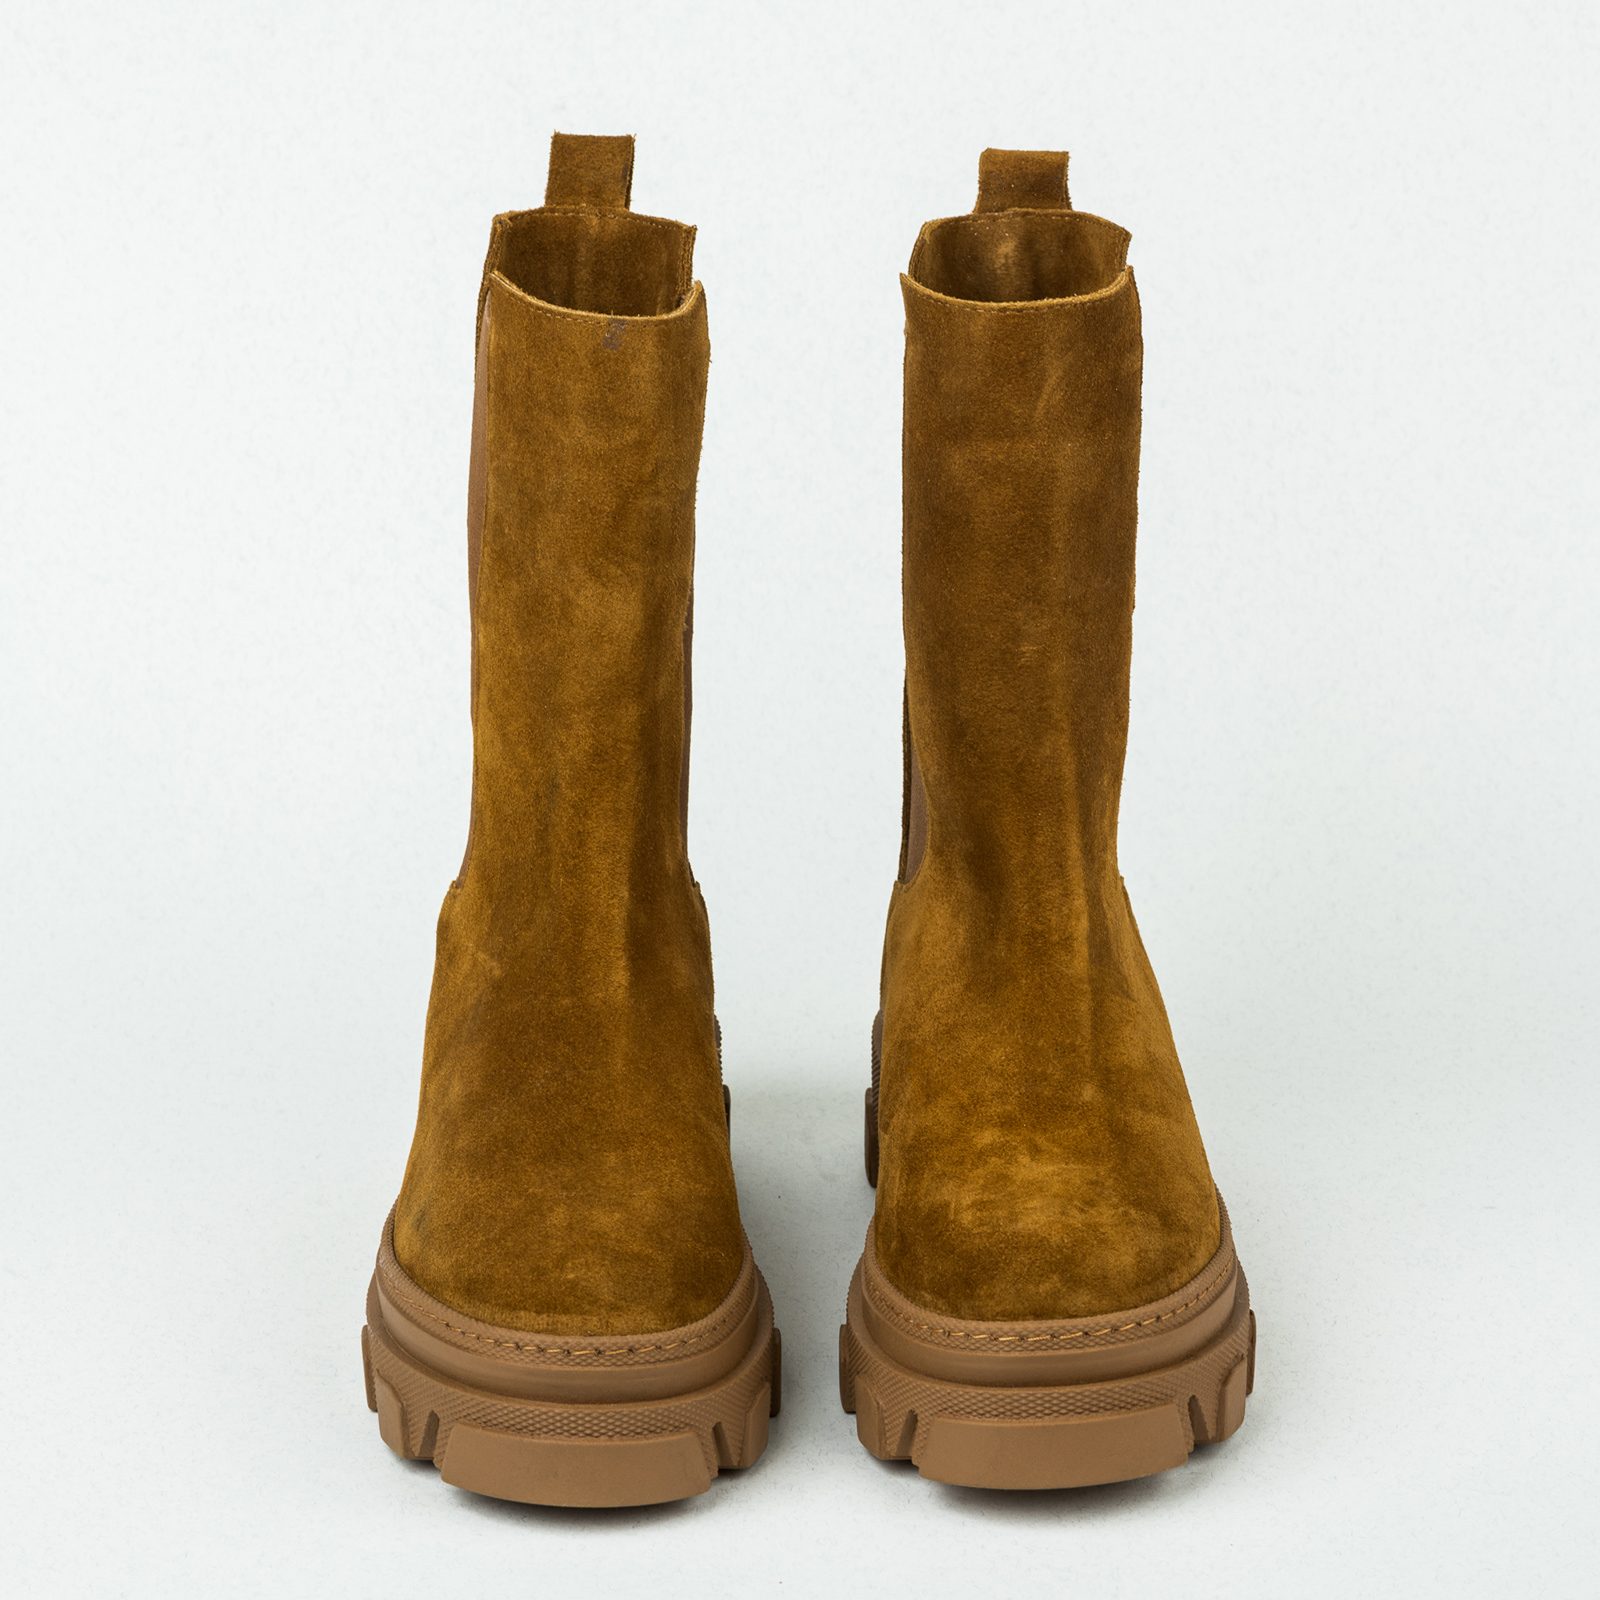 Leather WATERPROOF boots B077 - CAMEL